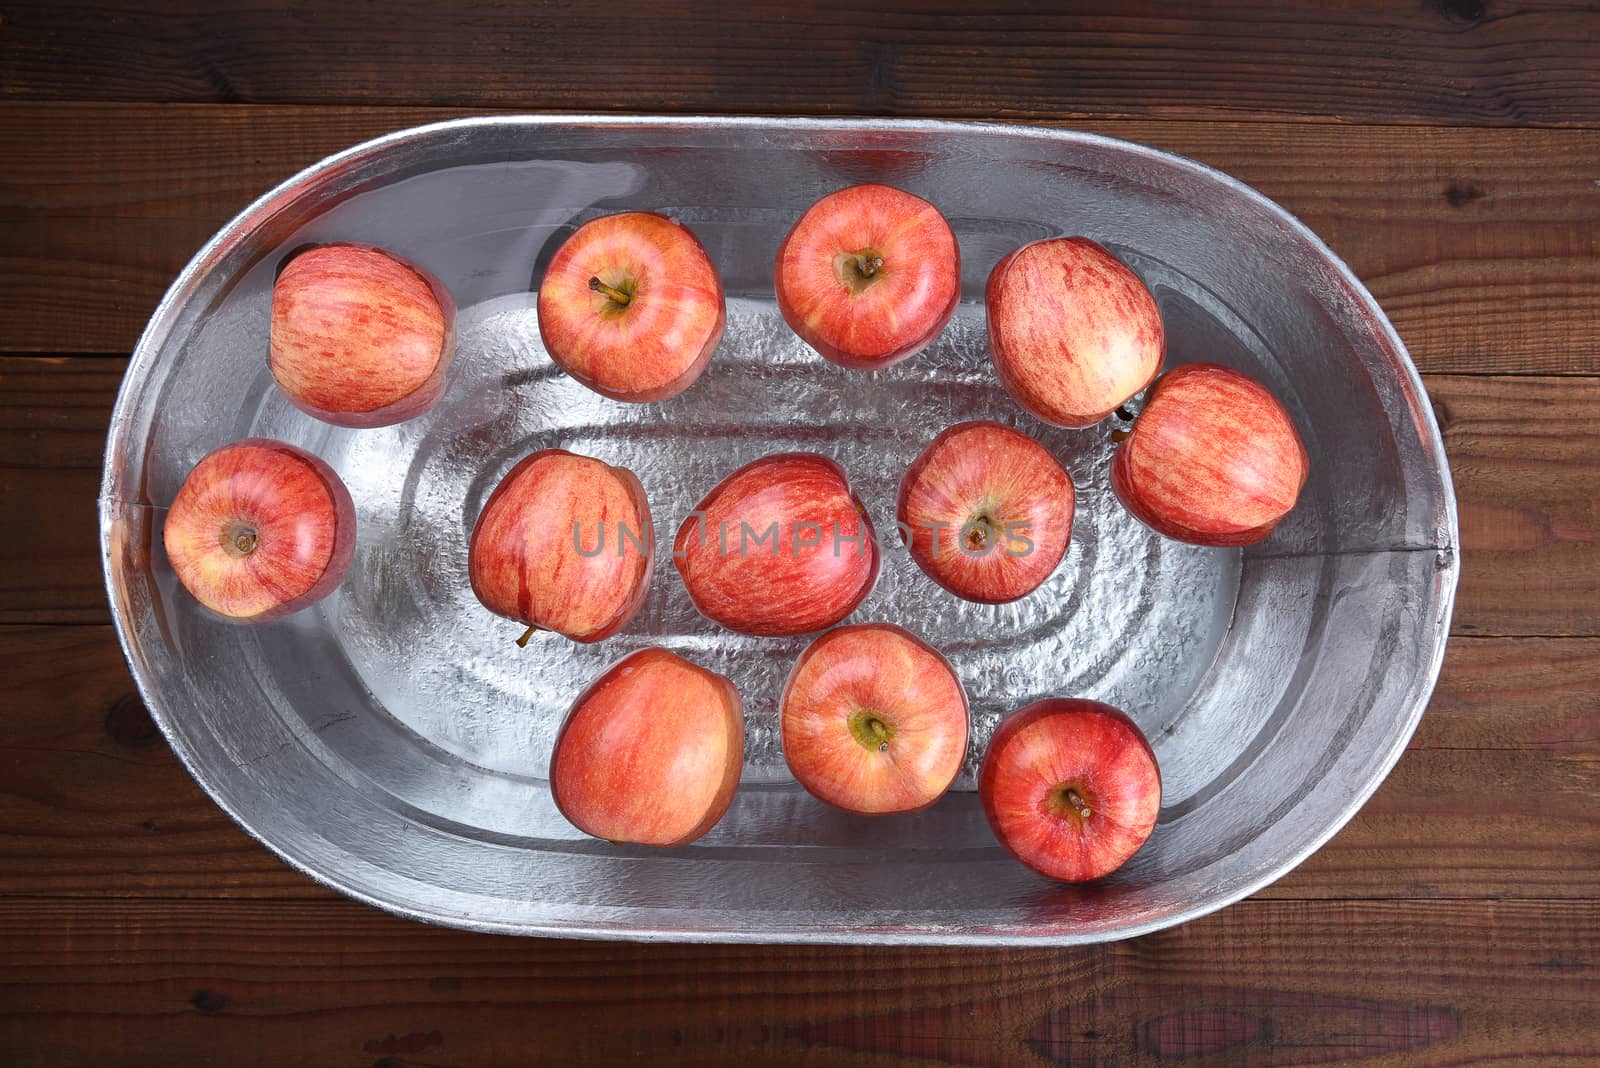 a metal tub filled with water and apples for the Halloween custo by sCukrov